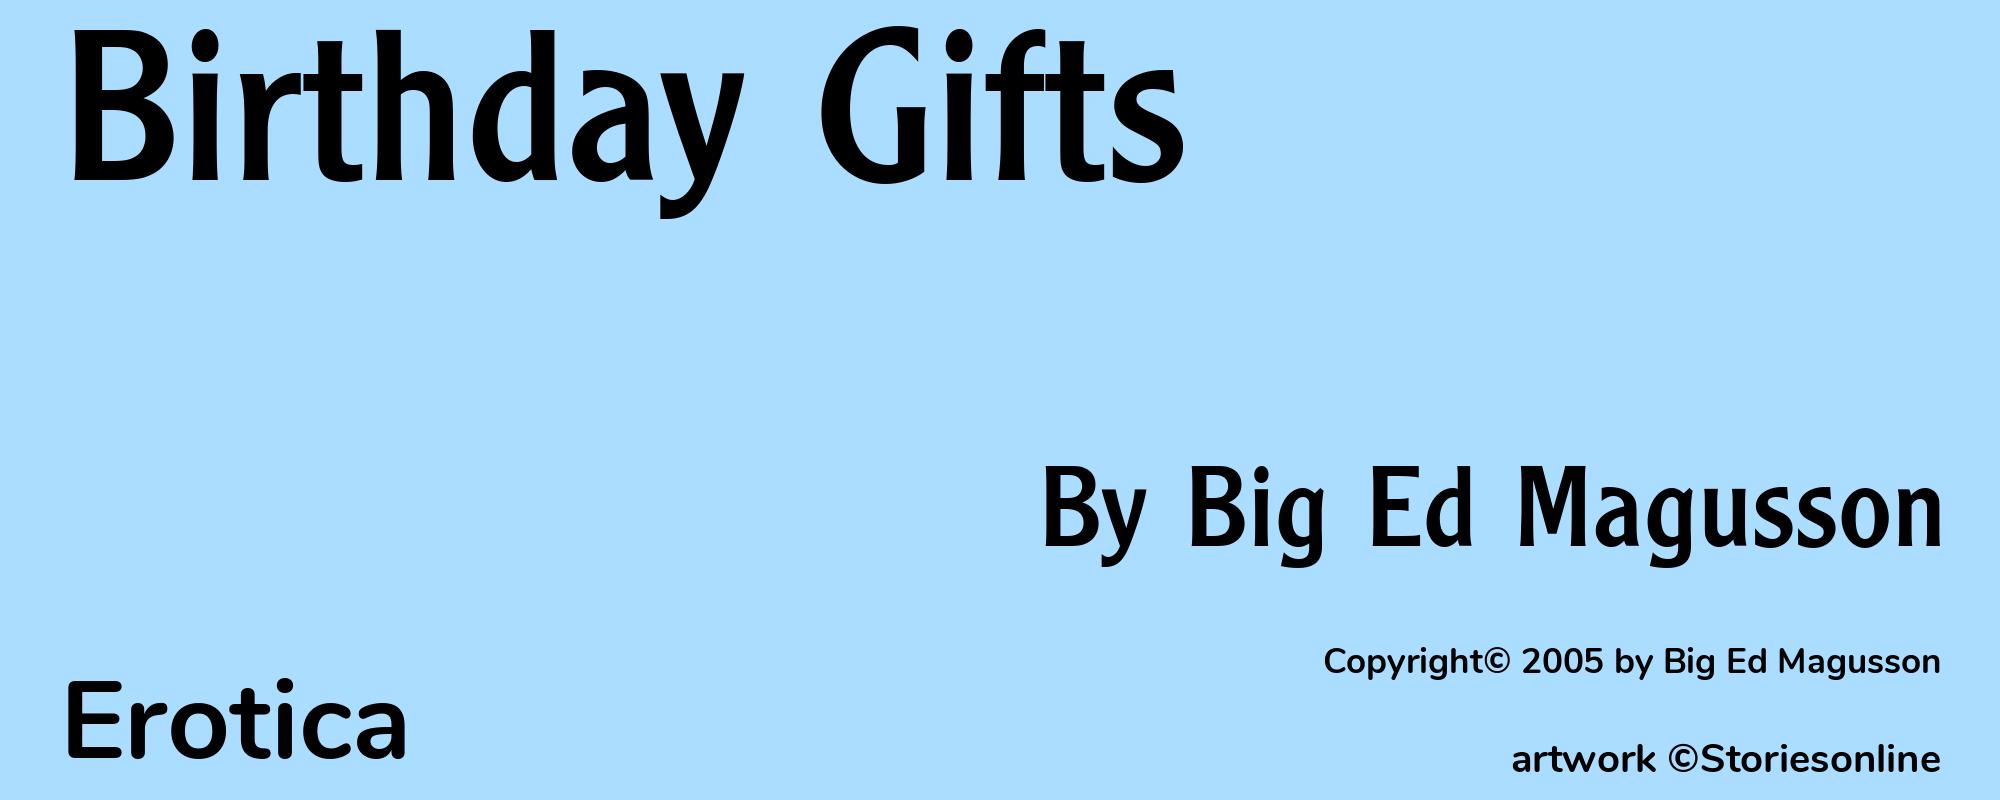 Birthday Gifts - Cover